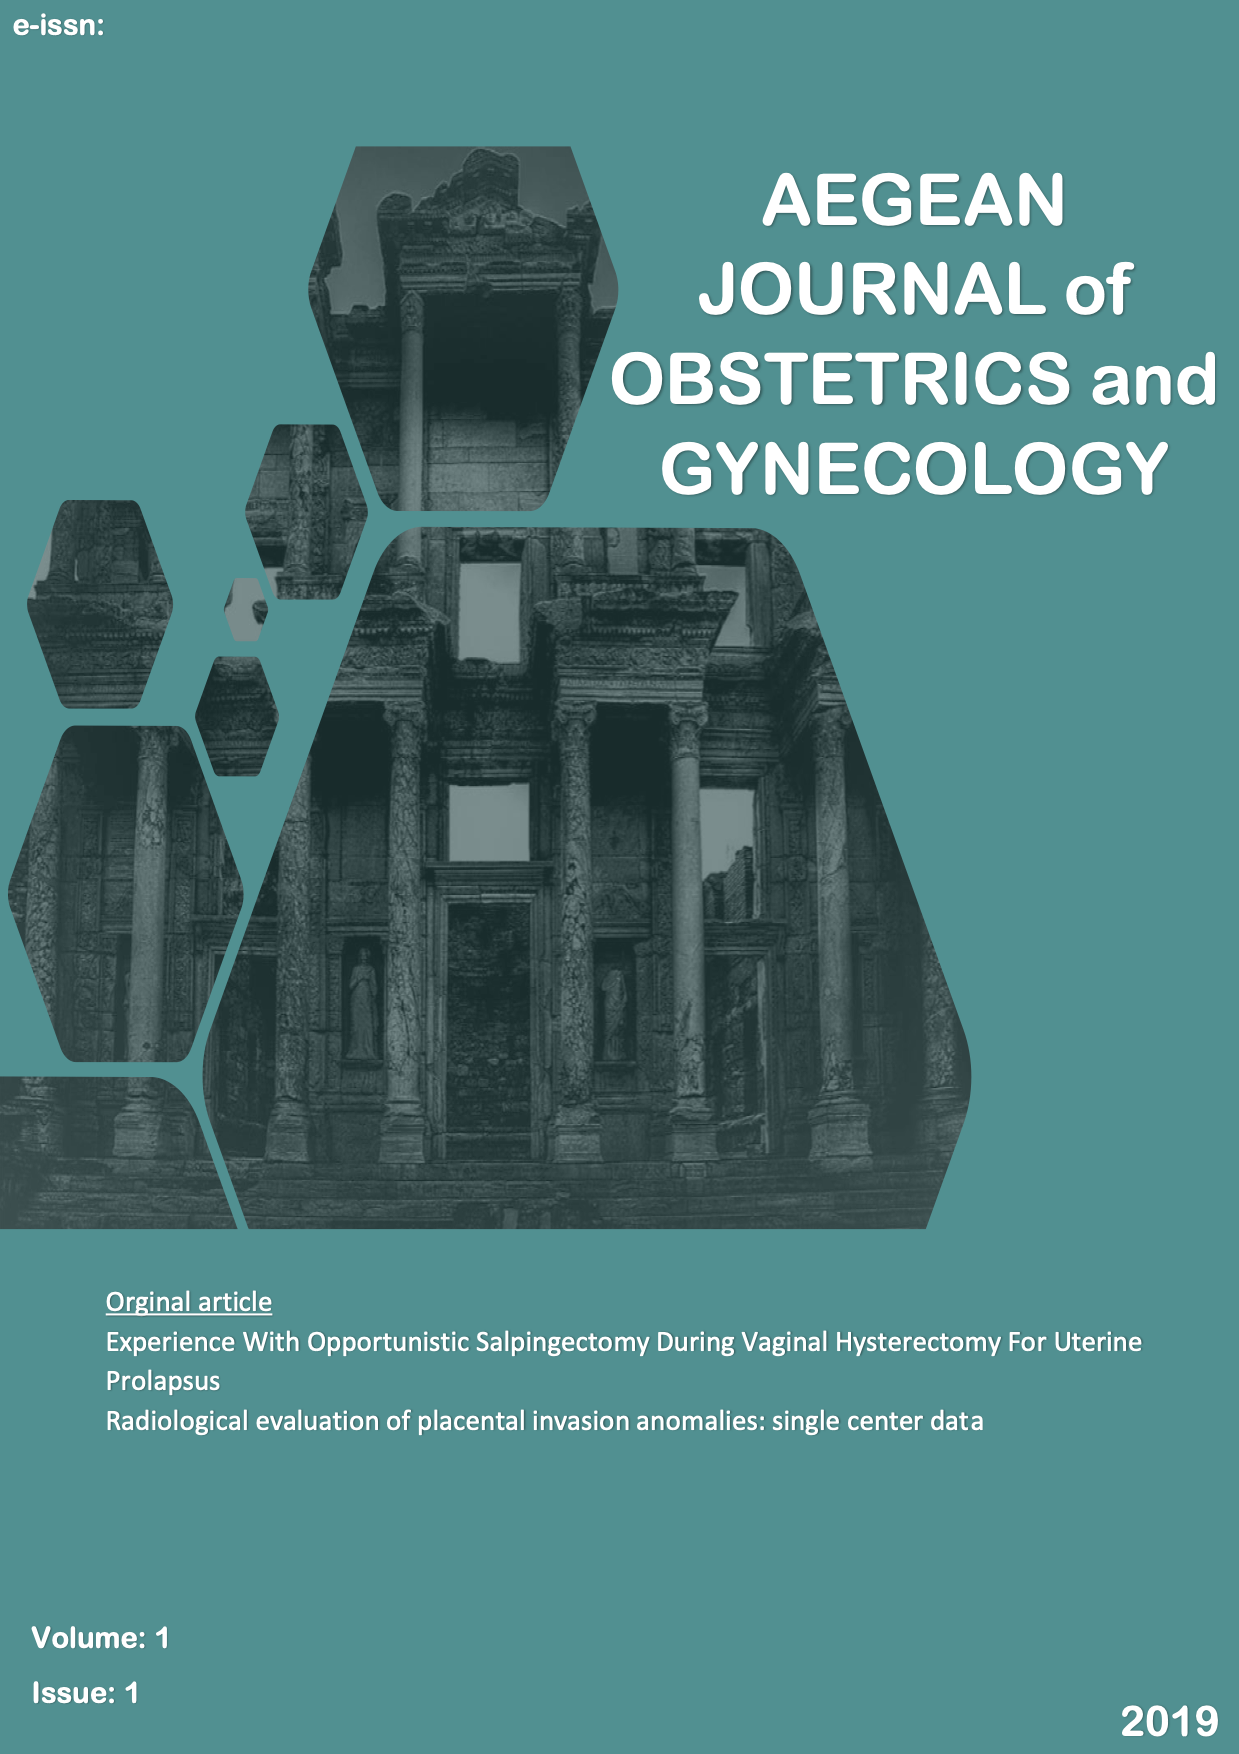 					View Vol. 1 No. 1 (2019): Aegean Journal of Obstetrics and Gynecology
				